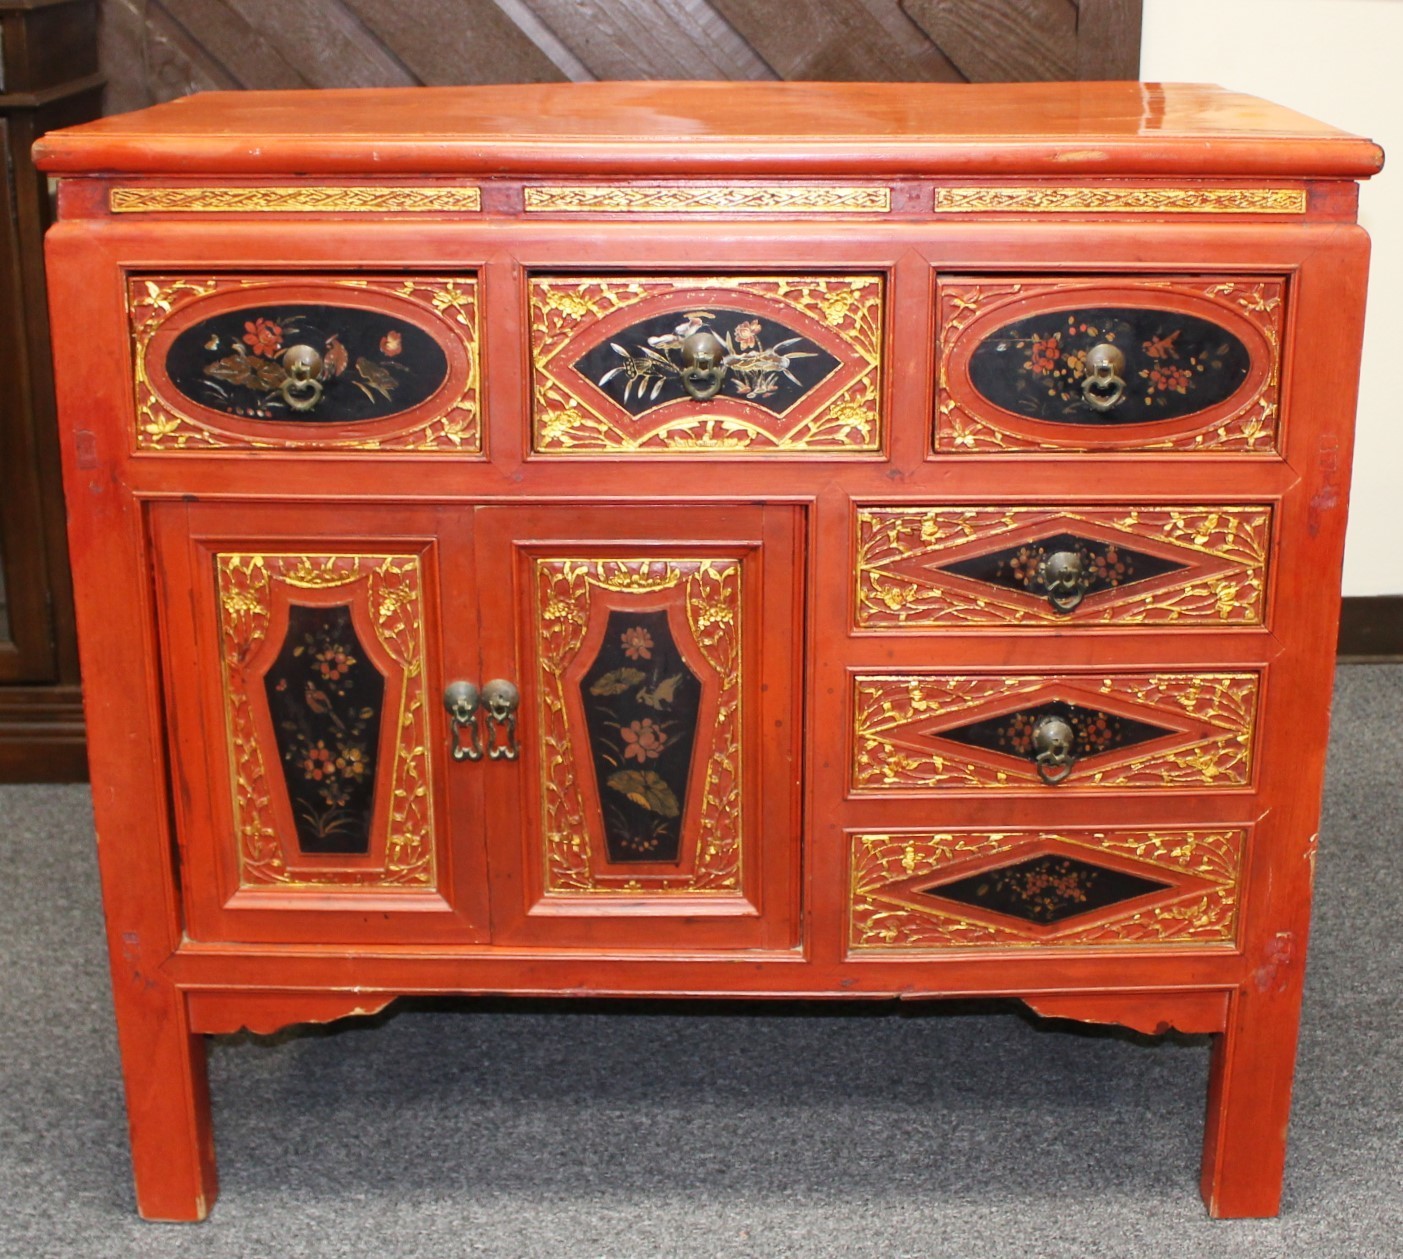 Chinese Lacquered and Gilded Solid Wood Storage 2-Door Cabinet with 5 Drawers